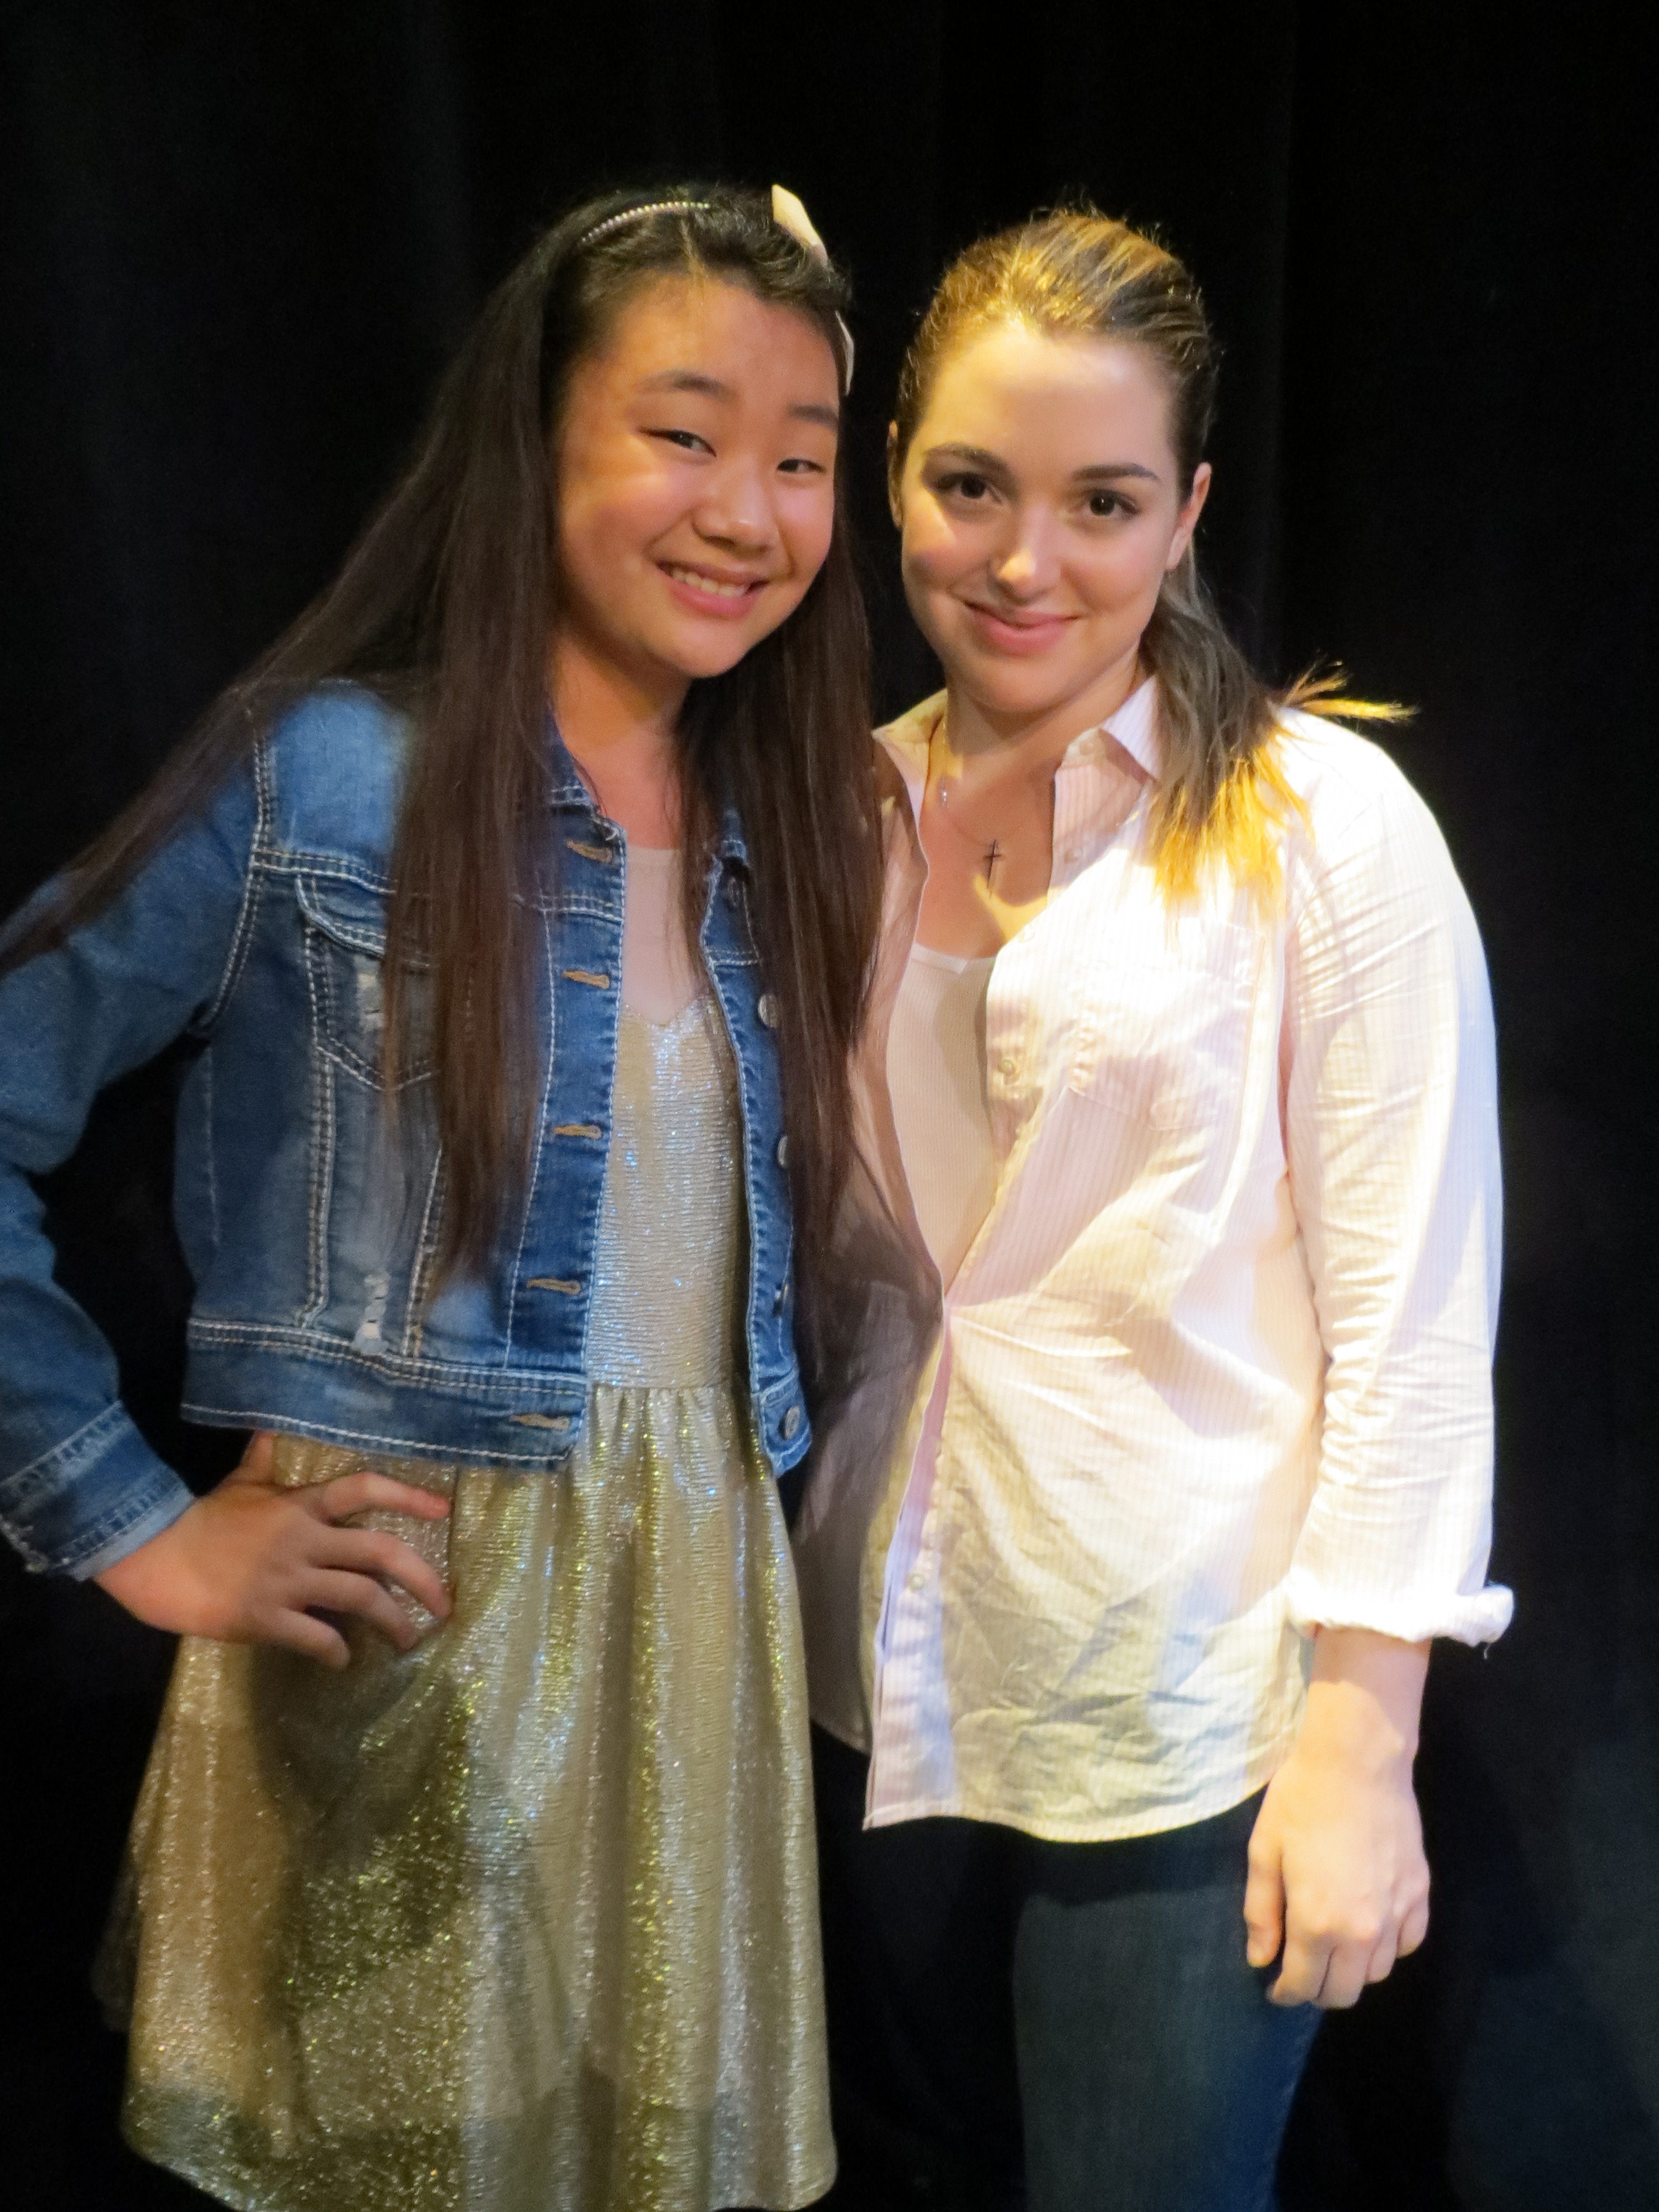 With Jennifer Stone from Nickelodeon's Deadtime Stories. See us in The Witching Game episode!